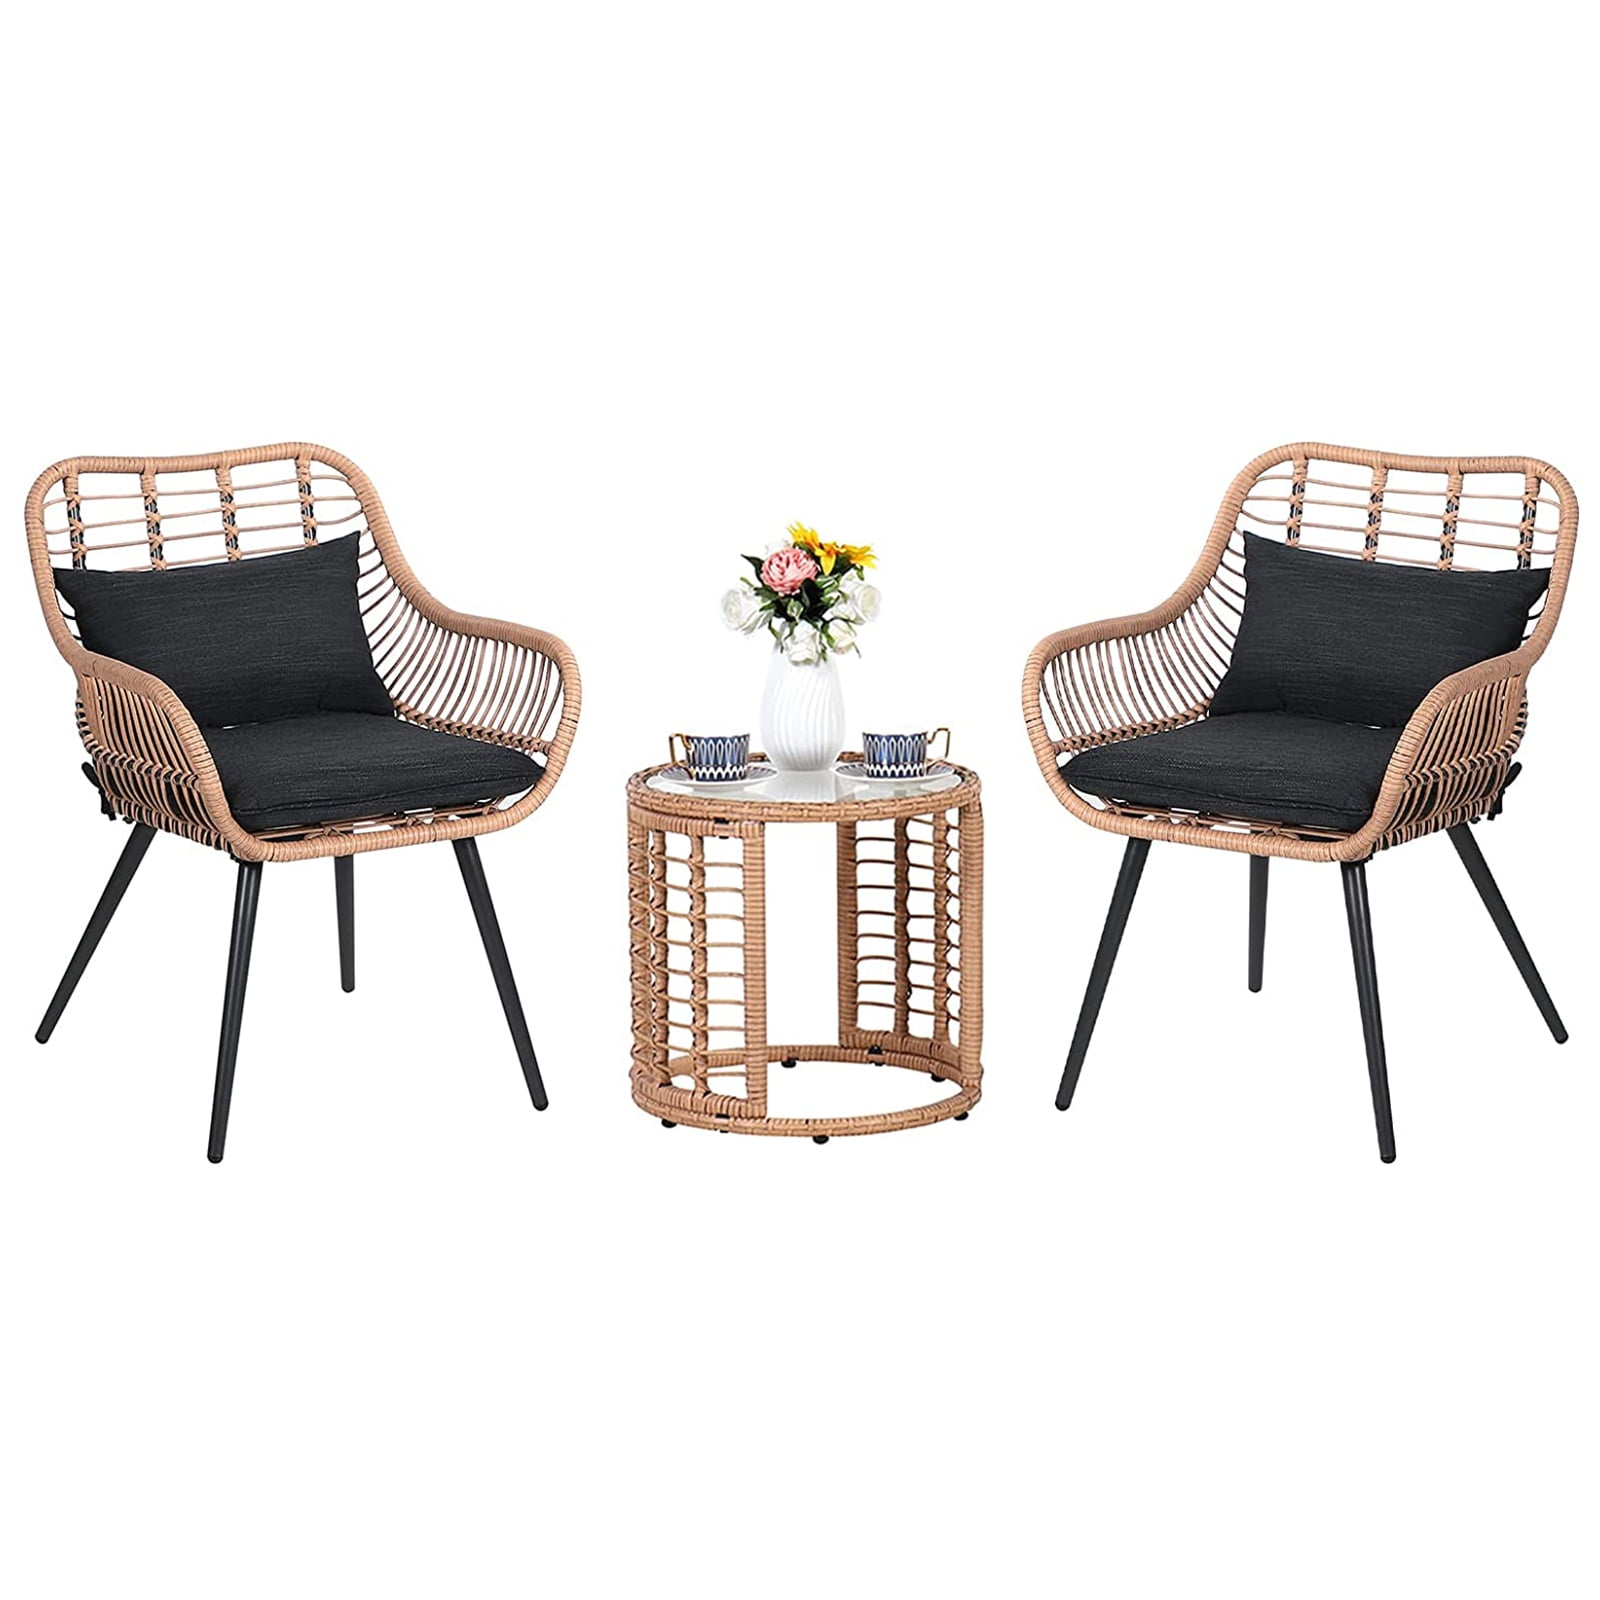 JOIVI 3 Piece Patio Set Outdoor PE Wicker Rattan Chairs Patio Furniture Conversation Modern Bistro Set with Wood Coffee Table for Backyard Porch Poolside Lawn 